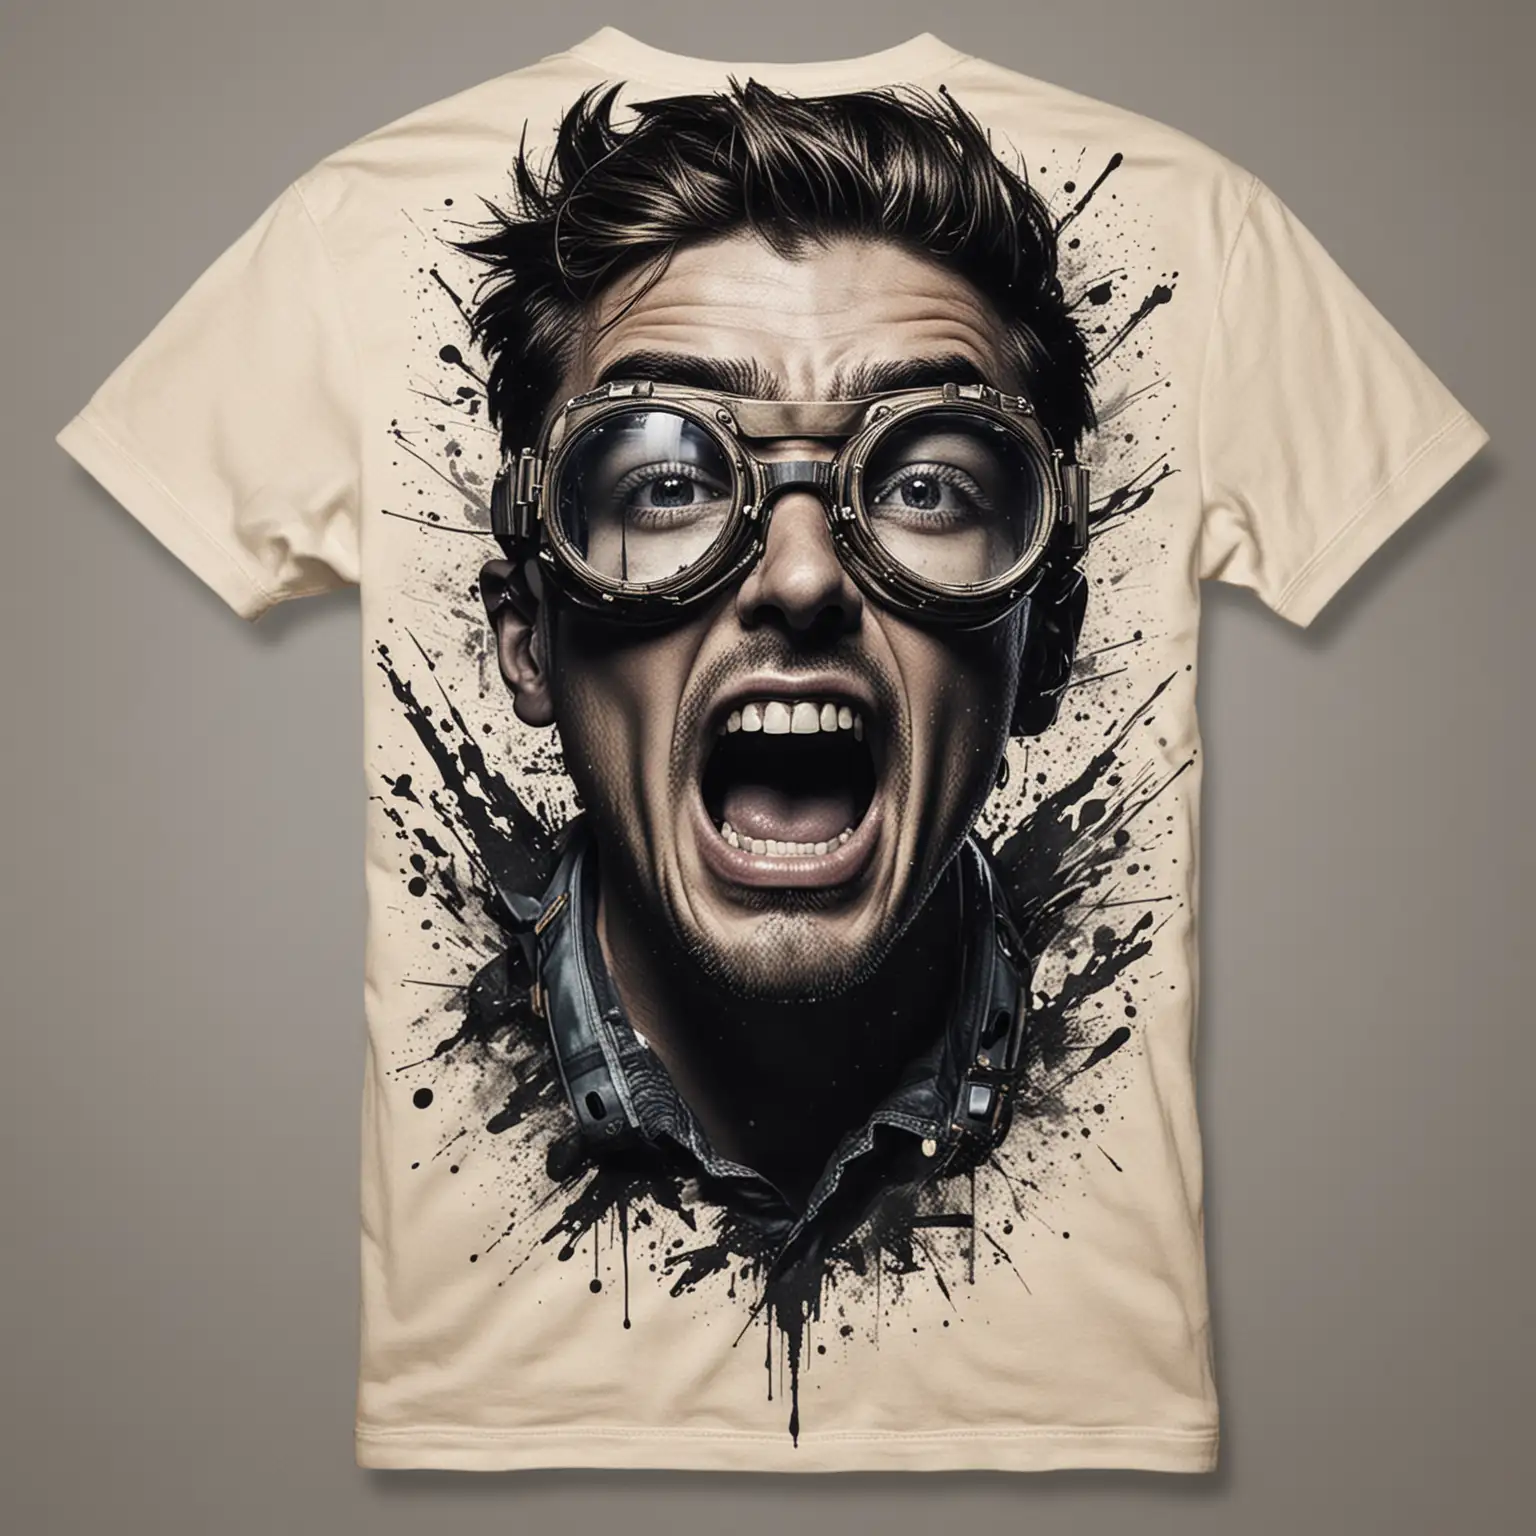 Intense Yell Man Graphic TShirt with Futuristic Goggles